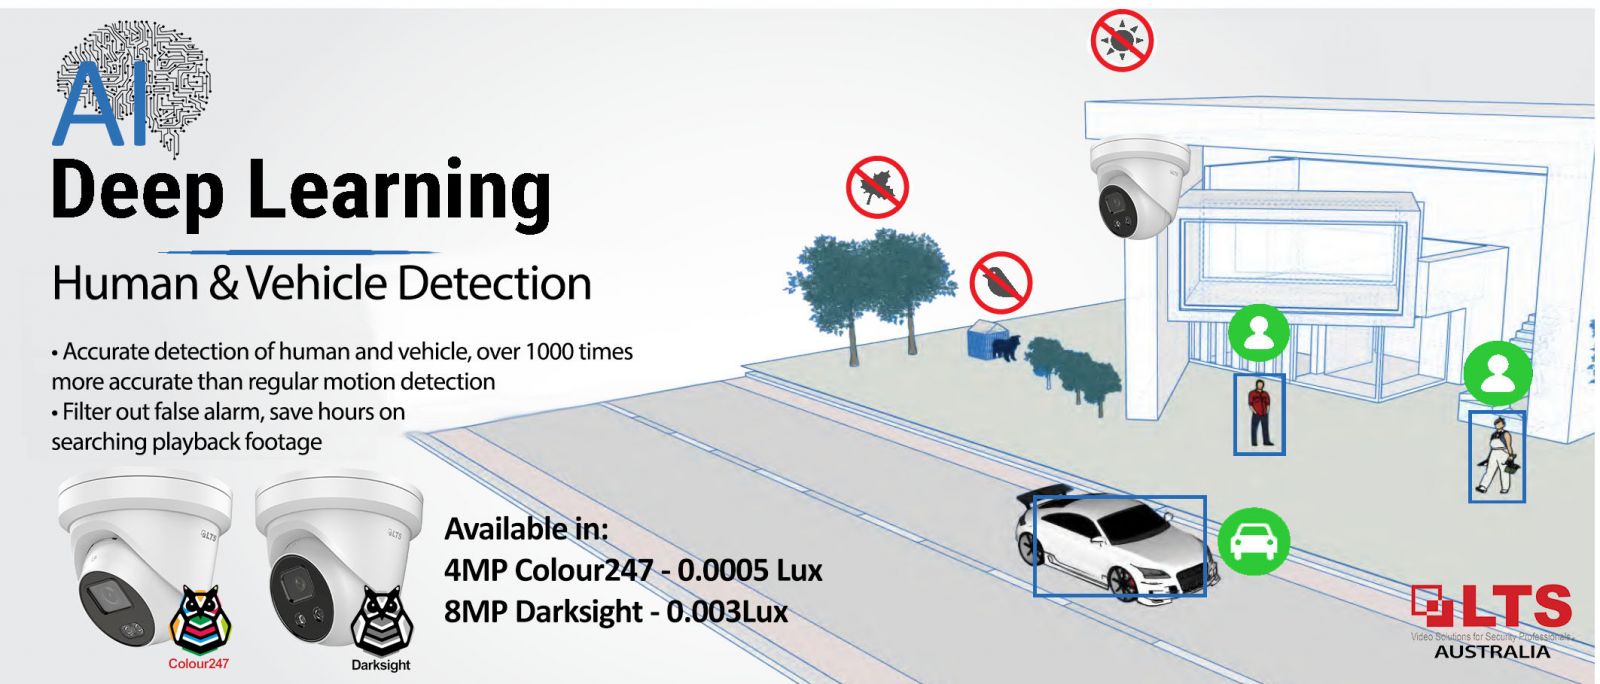 Vehicle Detection Using AI Security Camera System